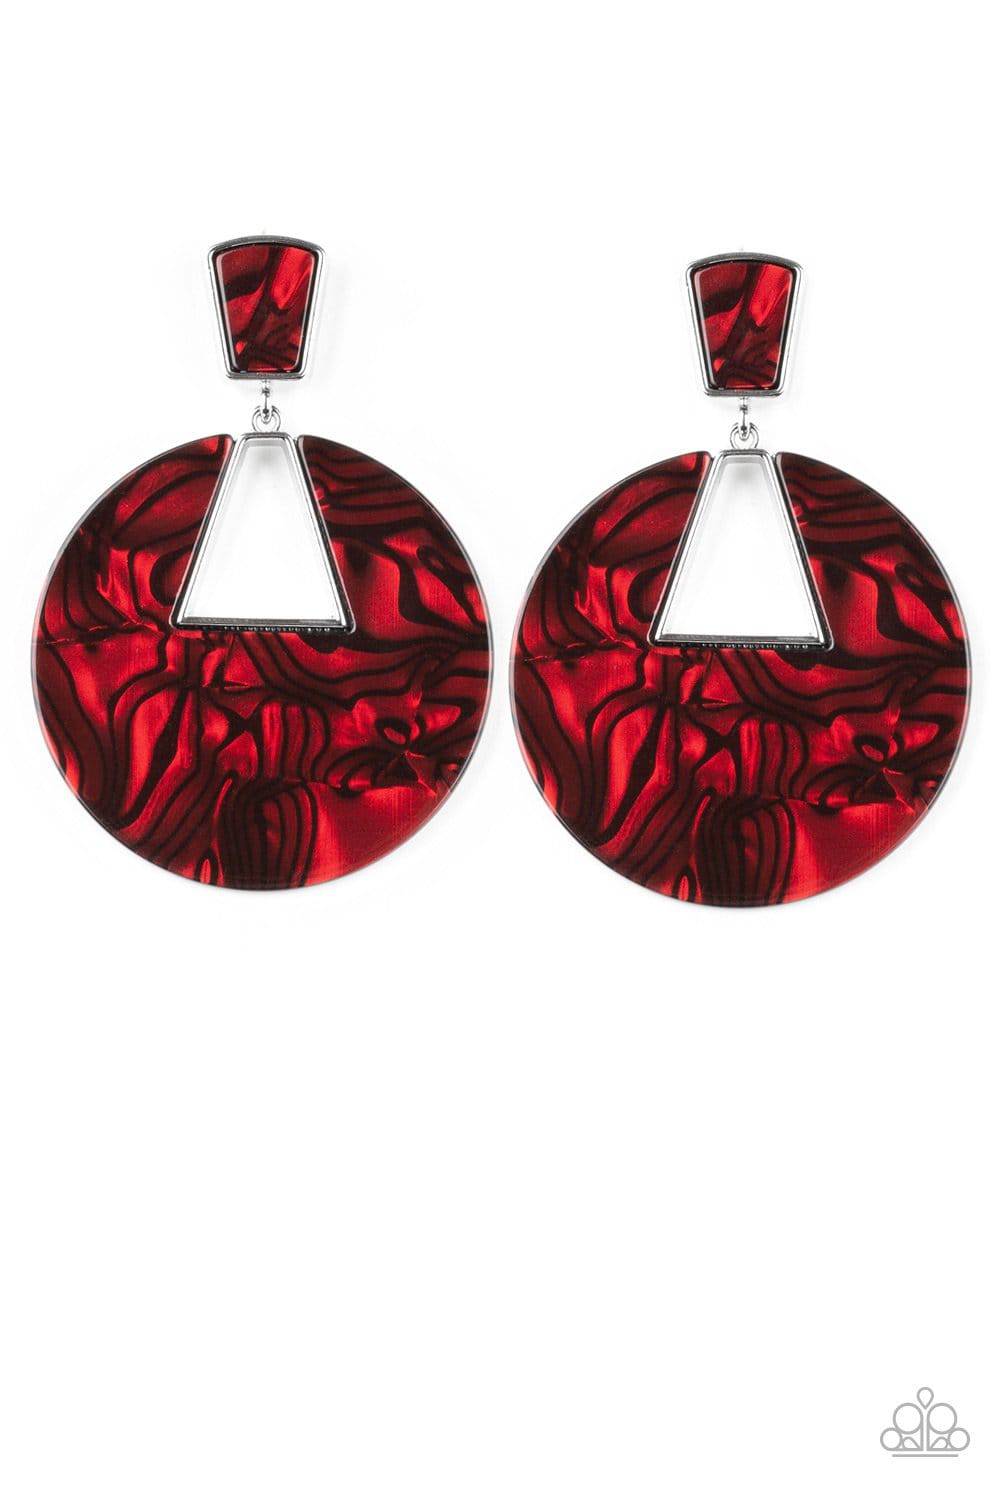 Let HEIR Rip! - Red Acrylic Post Earrings - Paparazzi Accessories - GlaMarous Titi Jewels